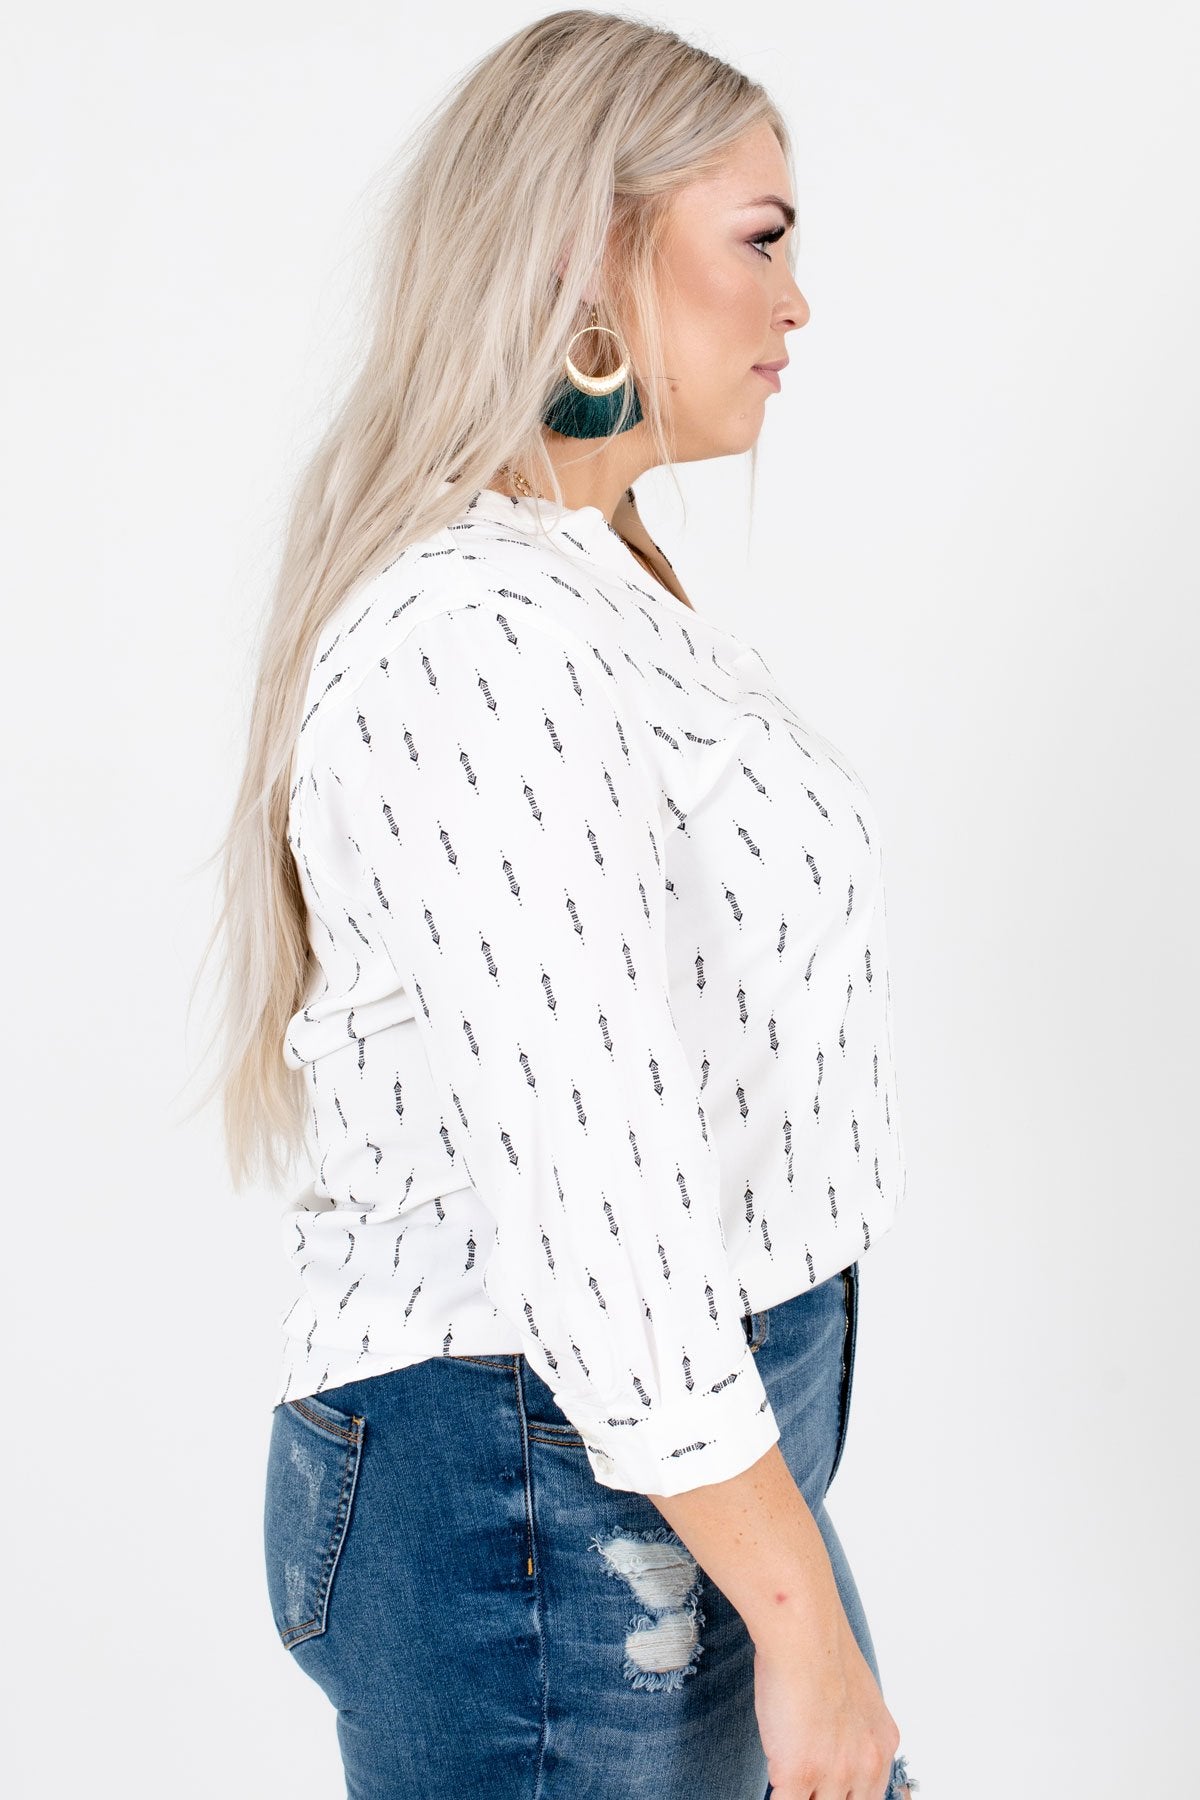 White High-Low Hem Boutique Blouses for Women